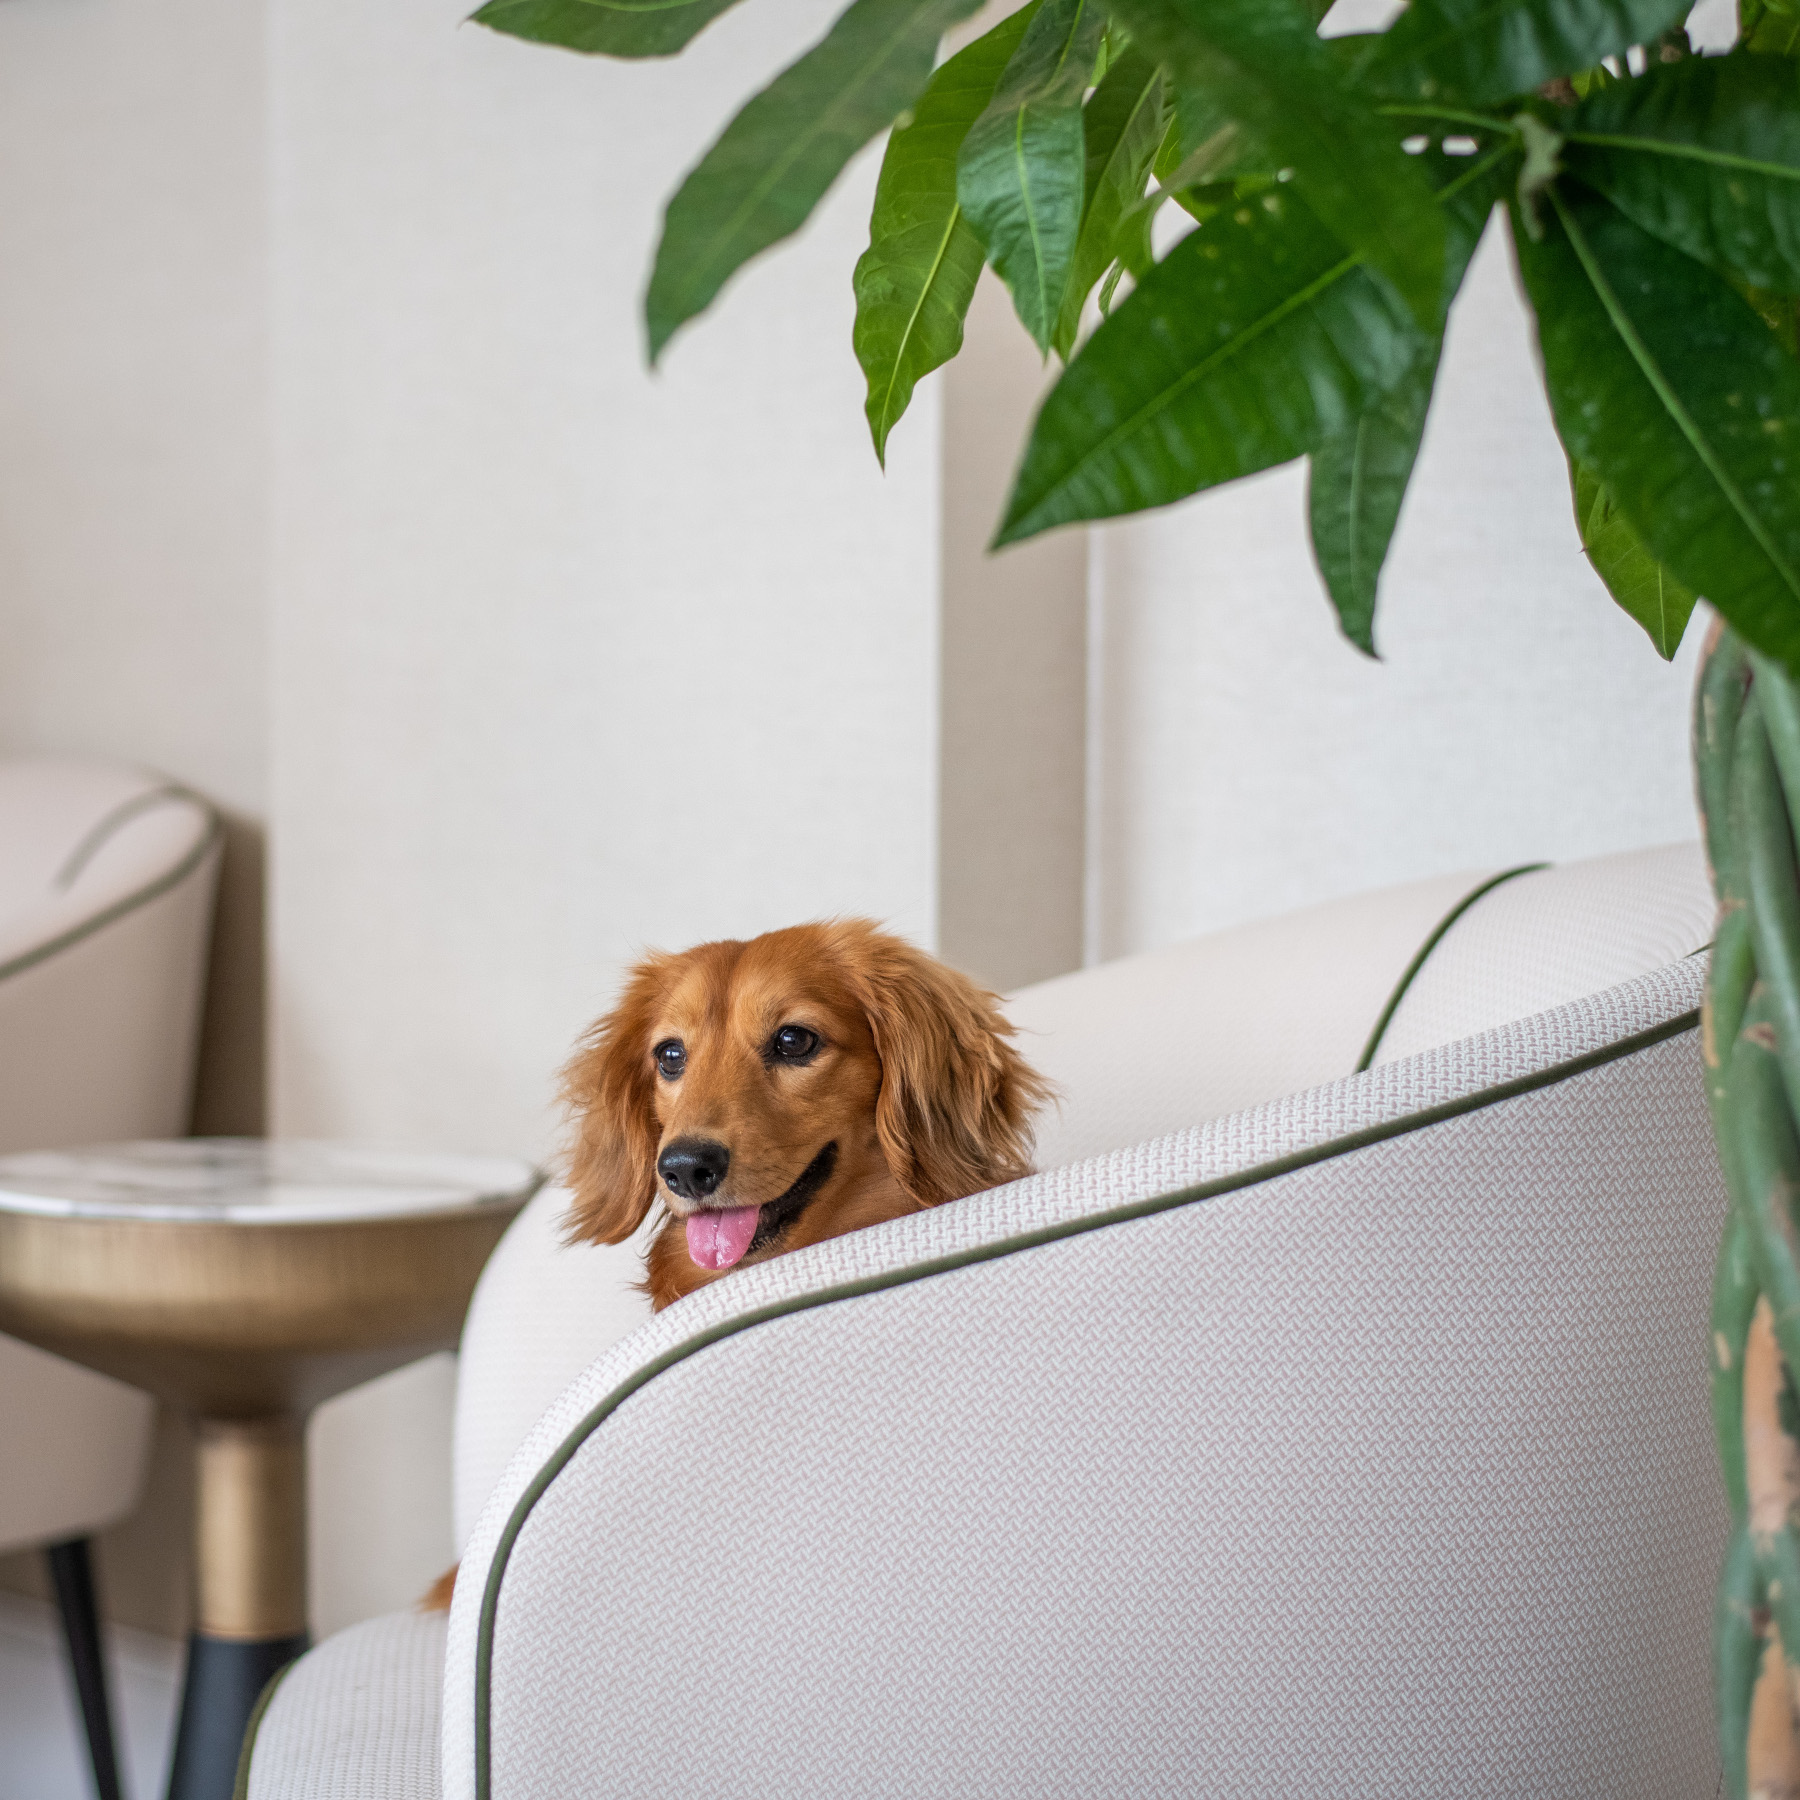 Sloane Place is a dog-friendly hotel